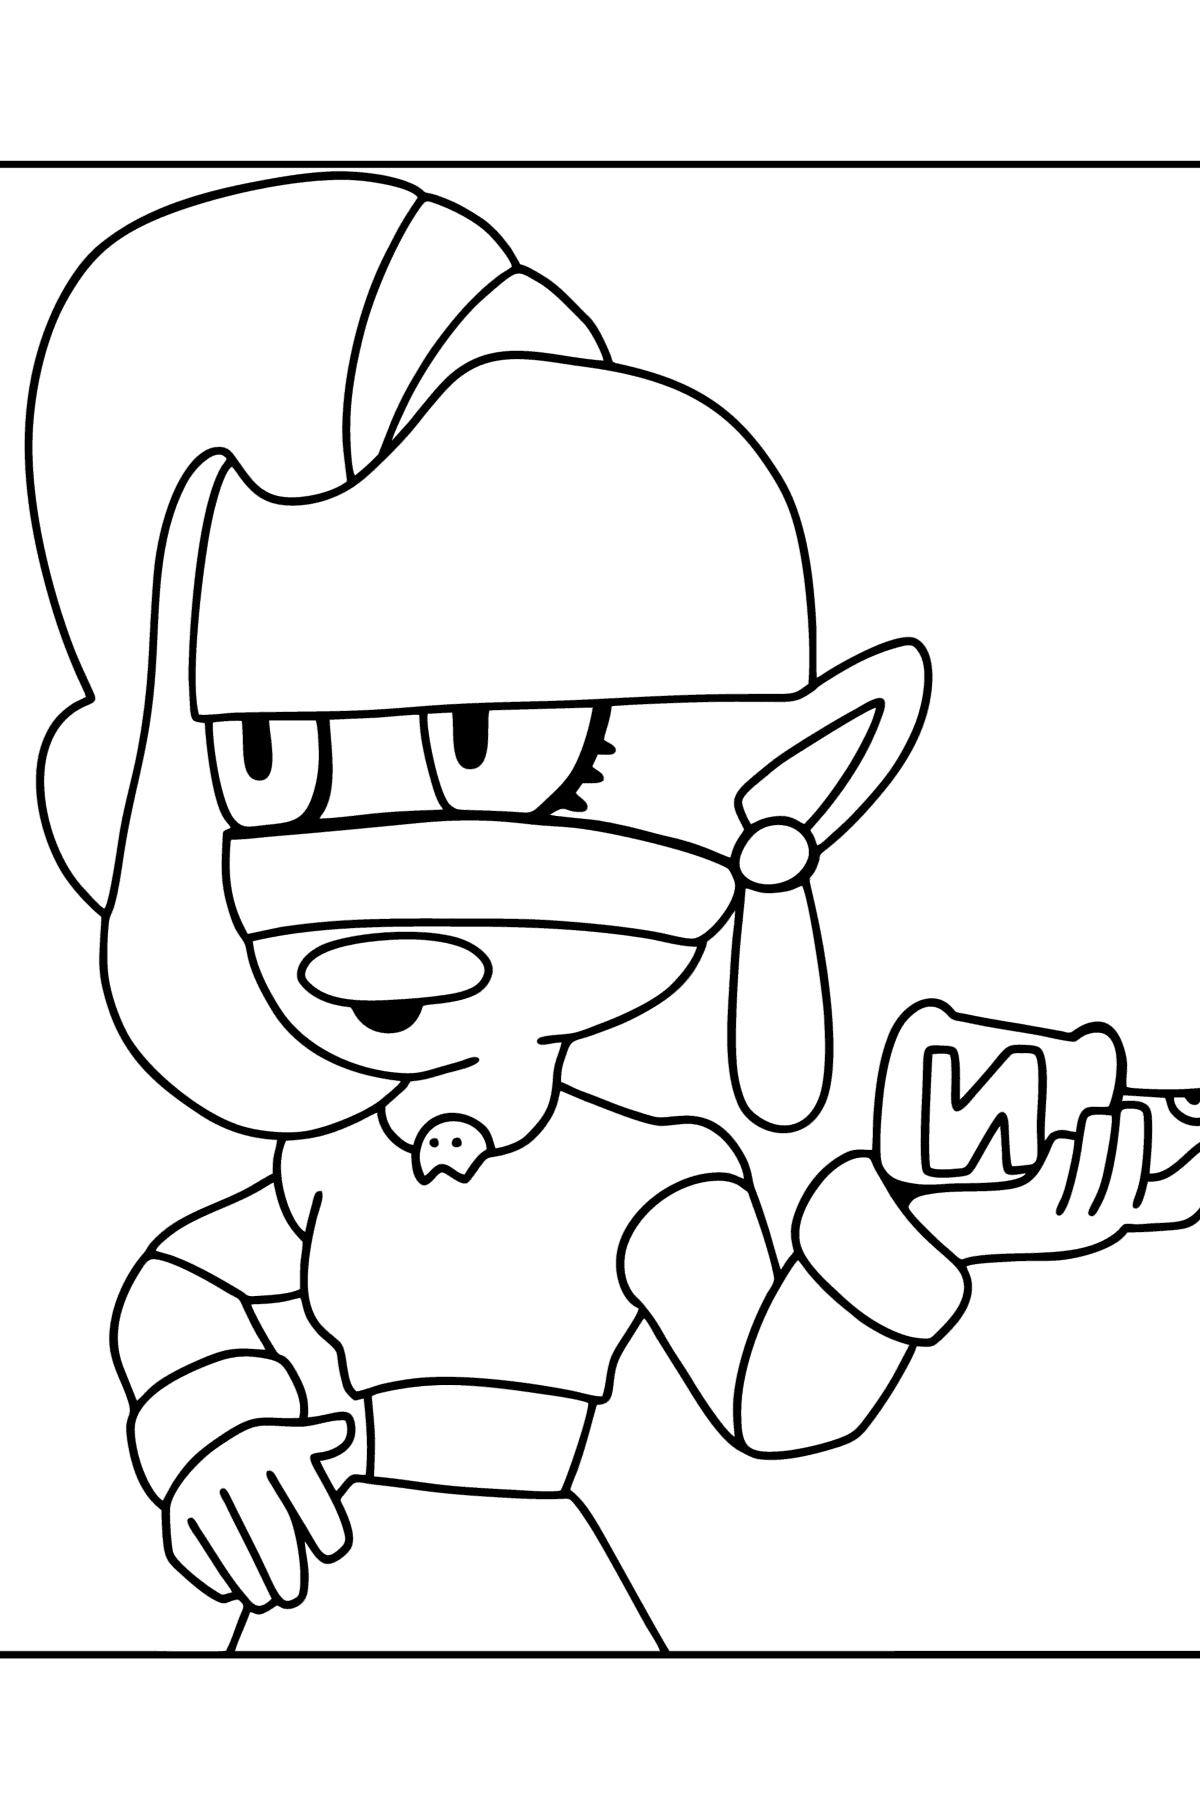 Brawl Stars Emz coloring page - Coloring Pages for Kids